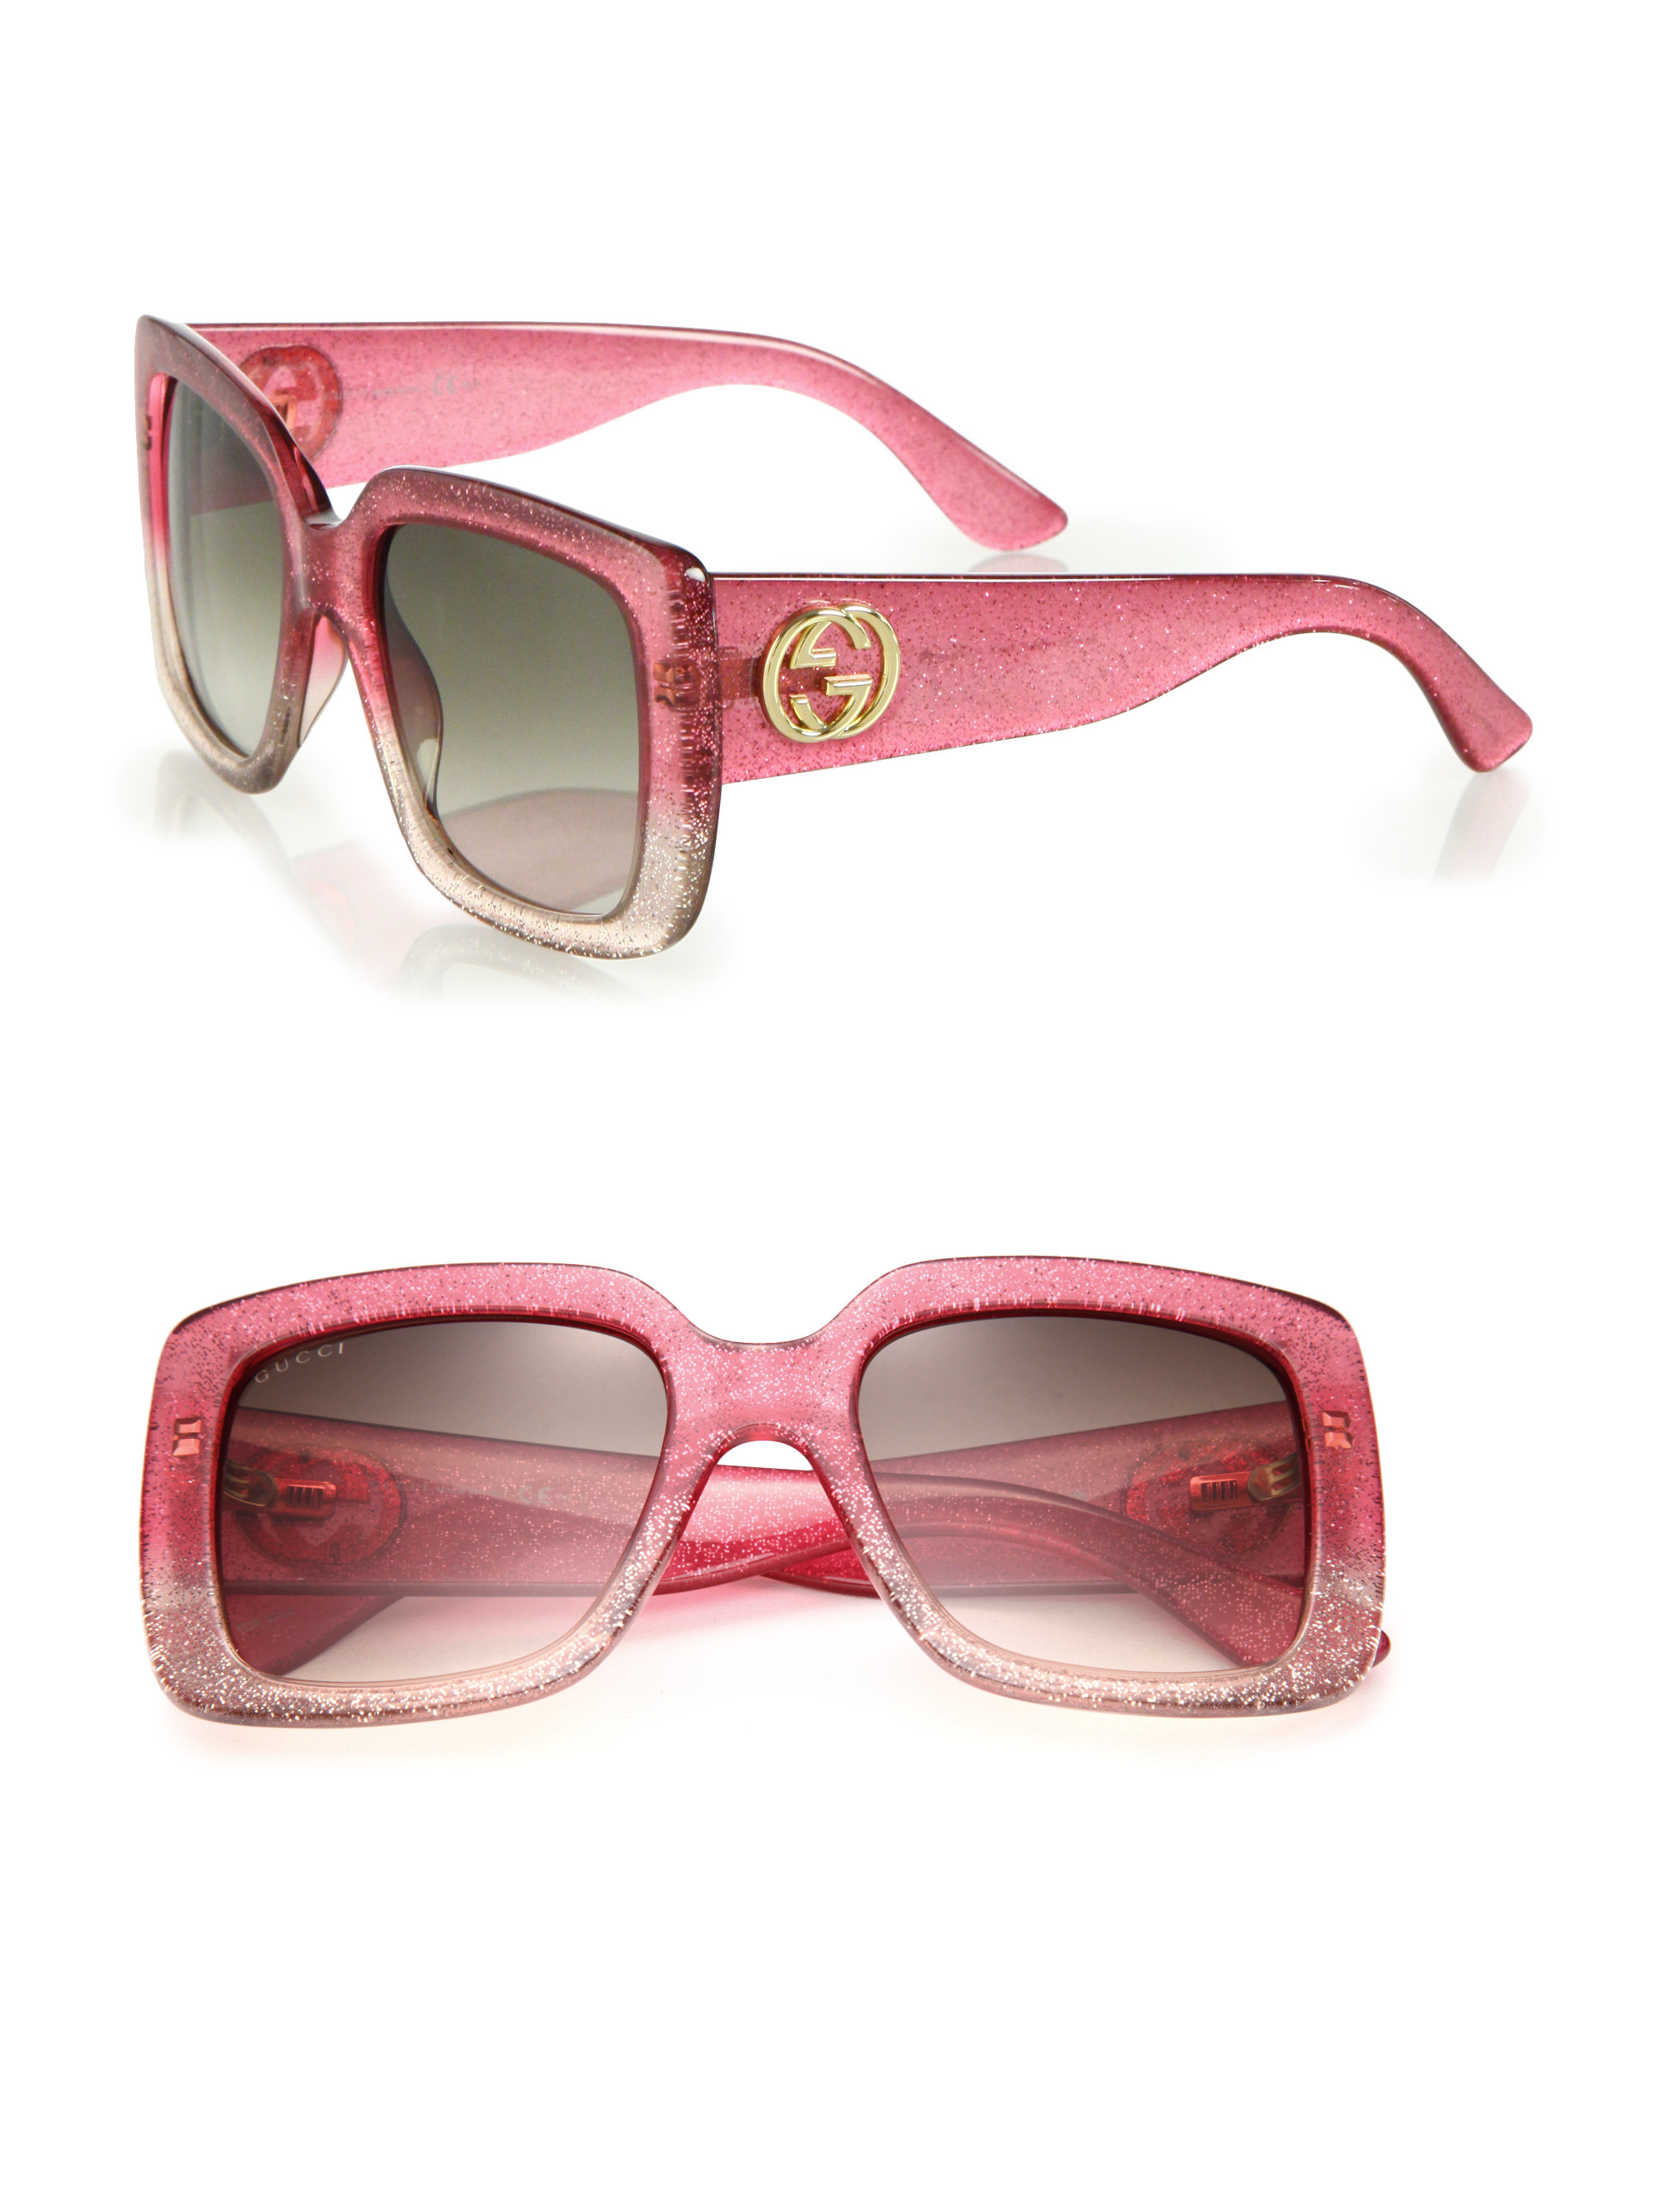 Gucci 53mm Oversized Square Glitter Sunglasses in Pink (Natural) - Lyst